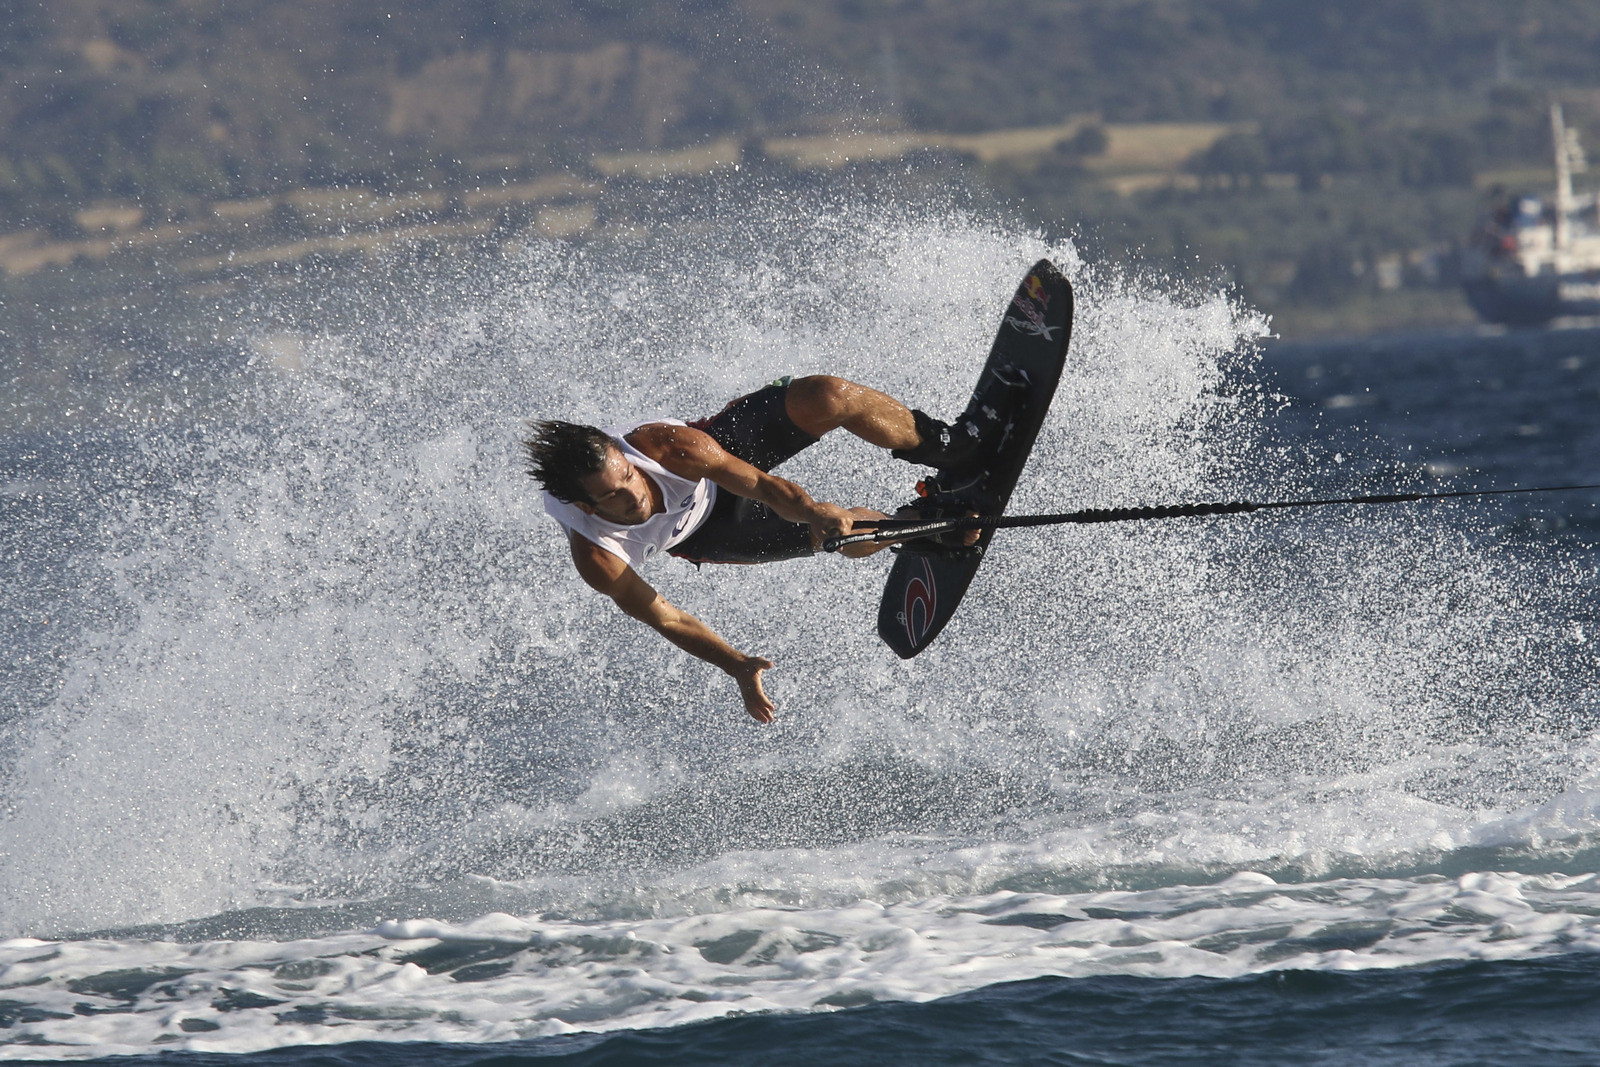 Water skiing competition produced several exciting moments ©Patras 2019